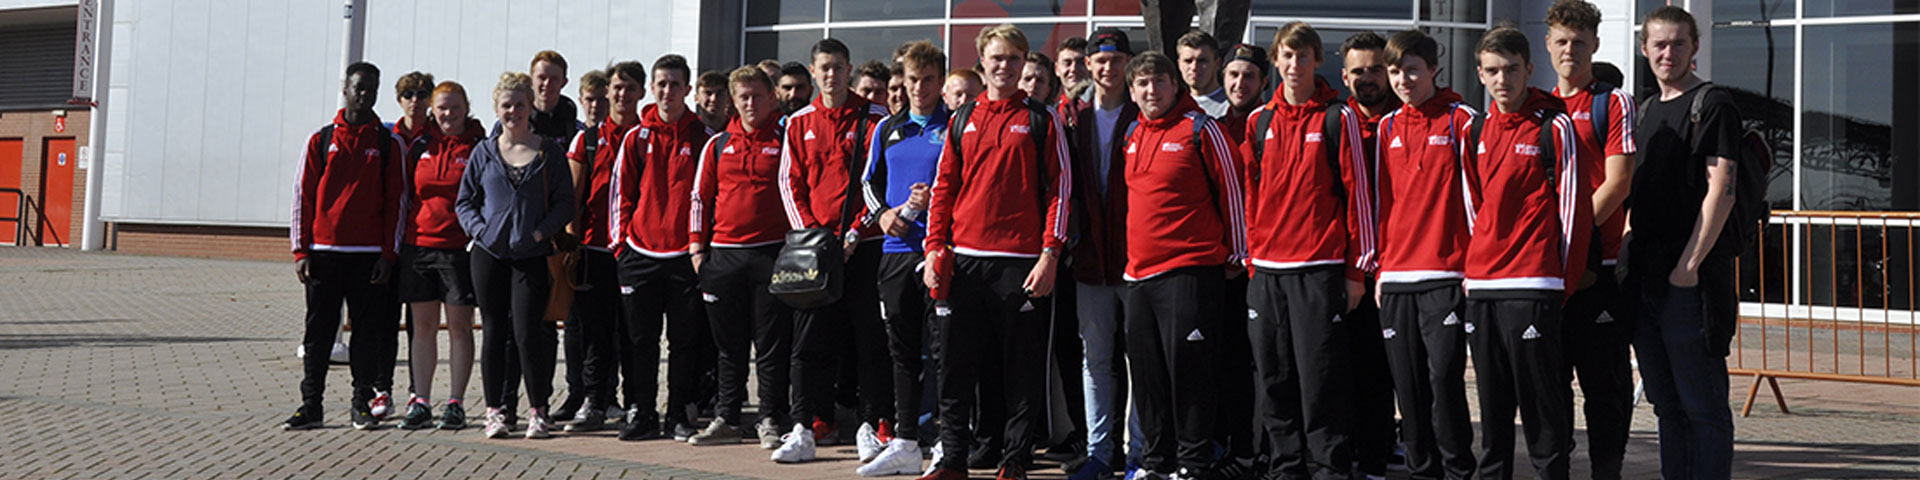 BA (Hons) Sport Coaching and Development students in front of the Ted Bates statue outside St Mary's Stadium